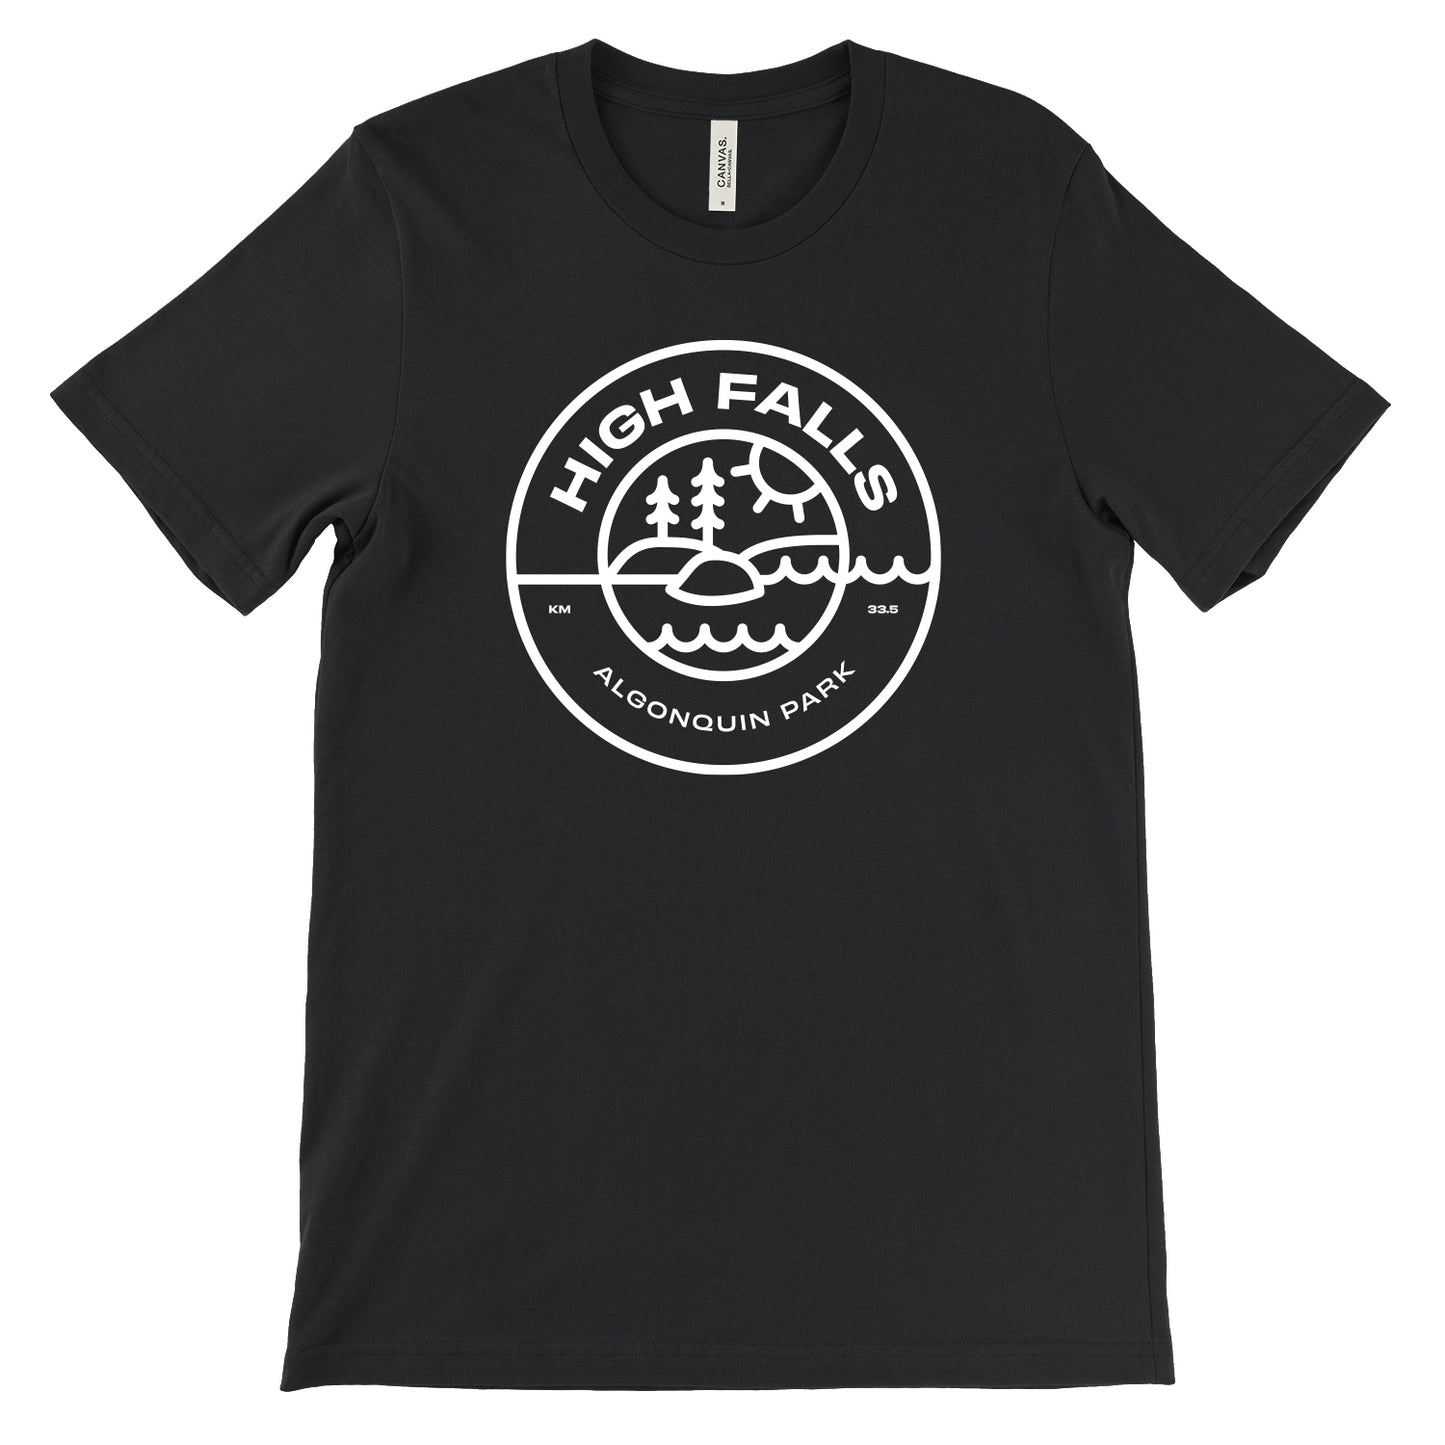 High falls black getaway t-shirt with white graphic